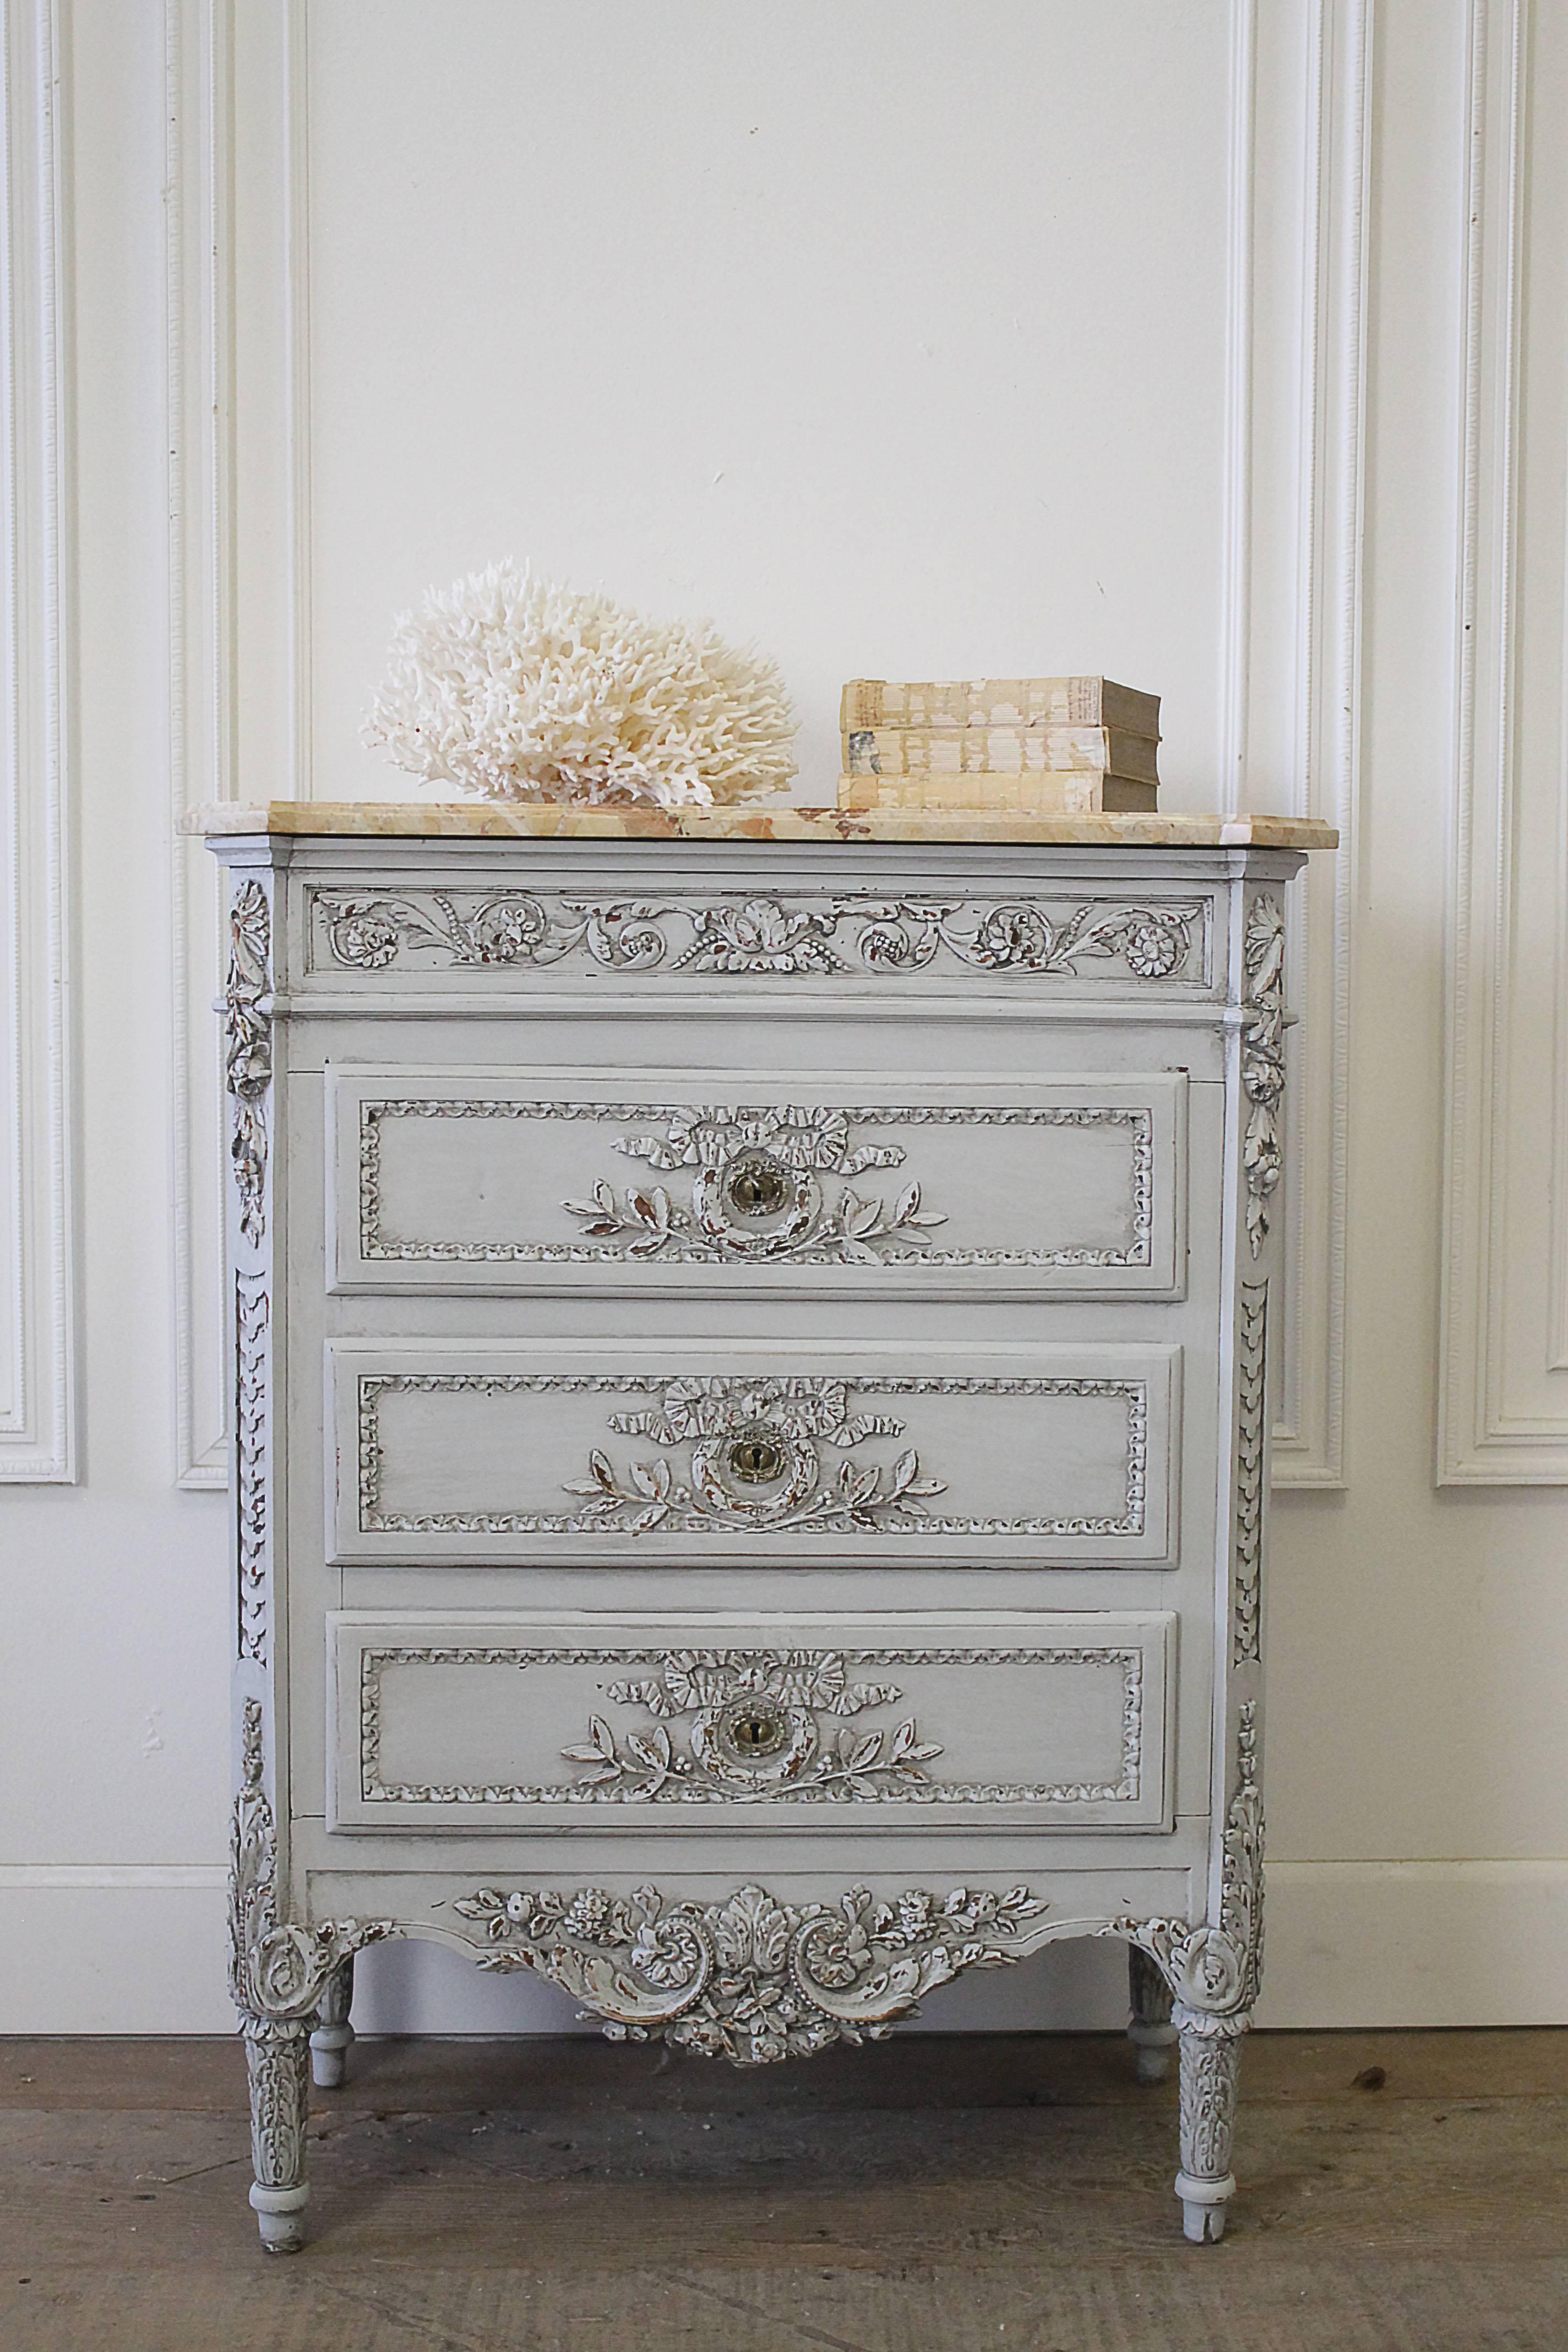 Lovely painted chest of drawers made in Belgium, with a dark cream golden tone top marble. The chest has a newly painted finish in a French grey, with light distressed edges. Beautiful intricate ribbon carvings, scrolls and roses. There is an